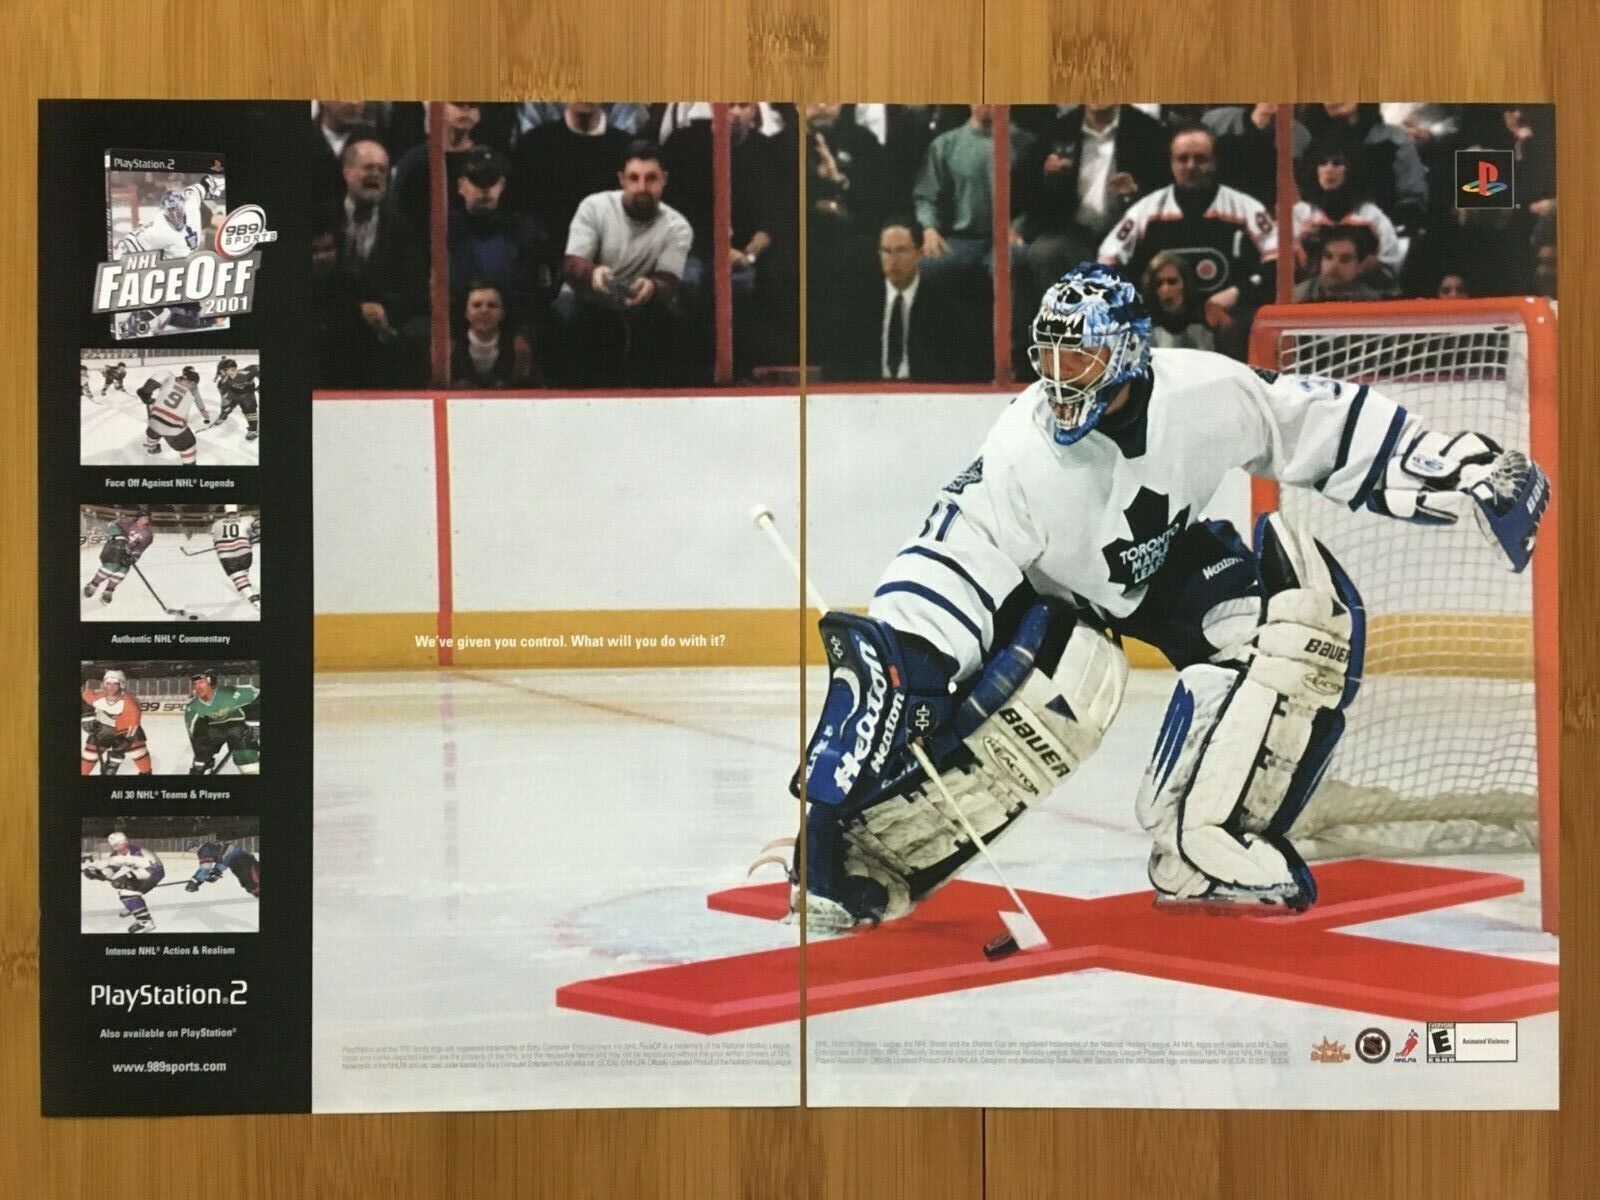 NHL FaceOff 2001 PS2 Vintage Print Ad/Poster Official Hockey CURTIS JOSEPH Art